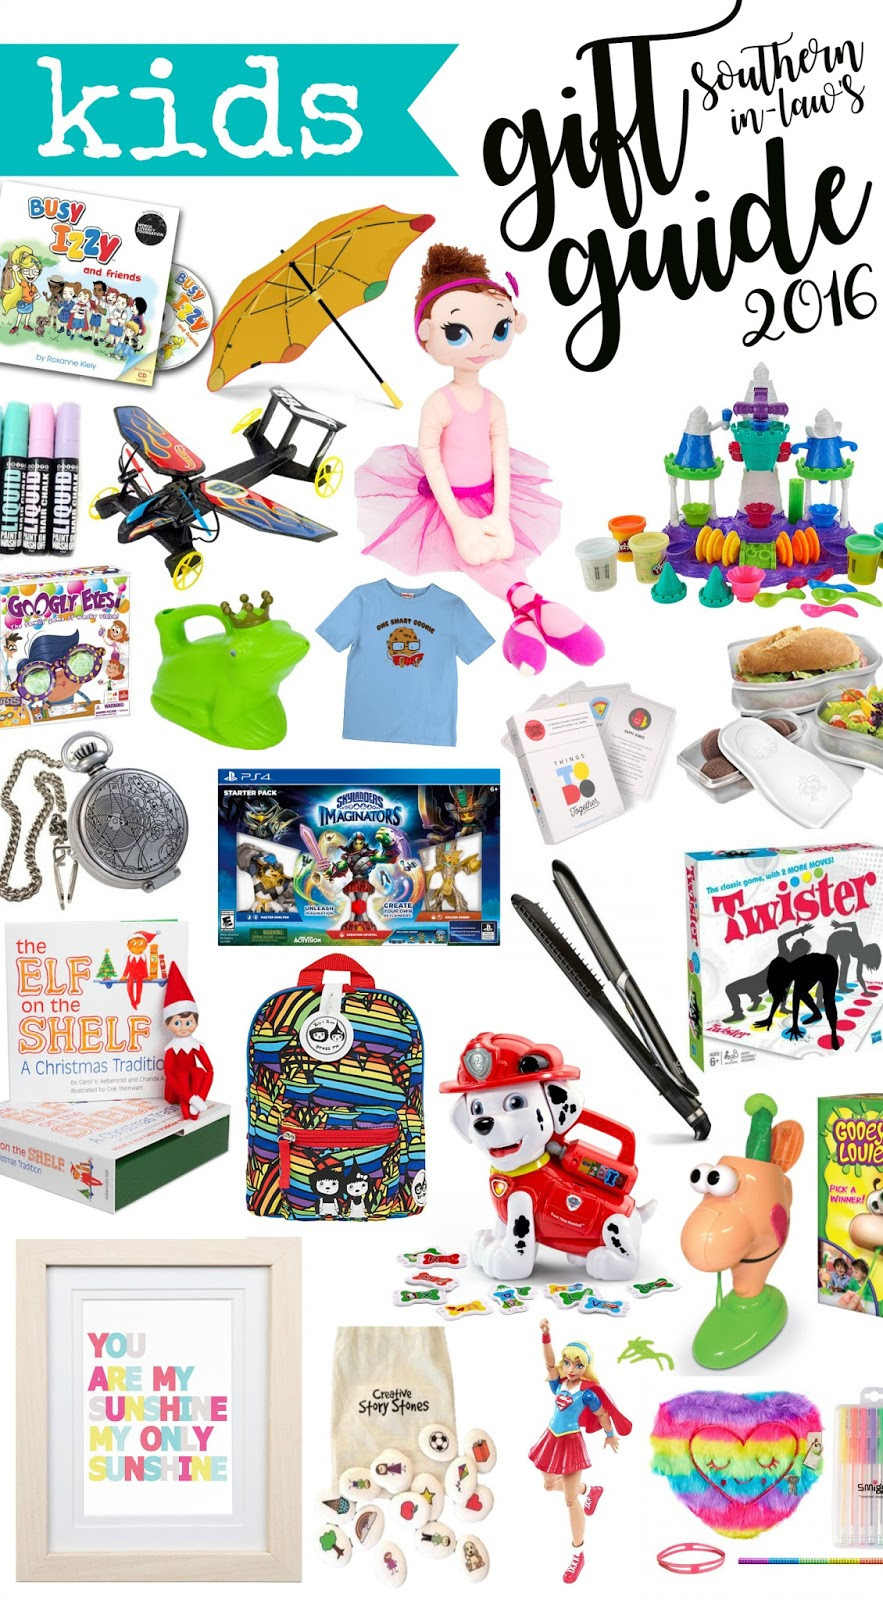 Christmas Gift Ideas For Kids
 Southern In Law 2016 Kids Christmas Gift Guide